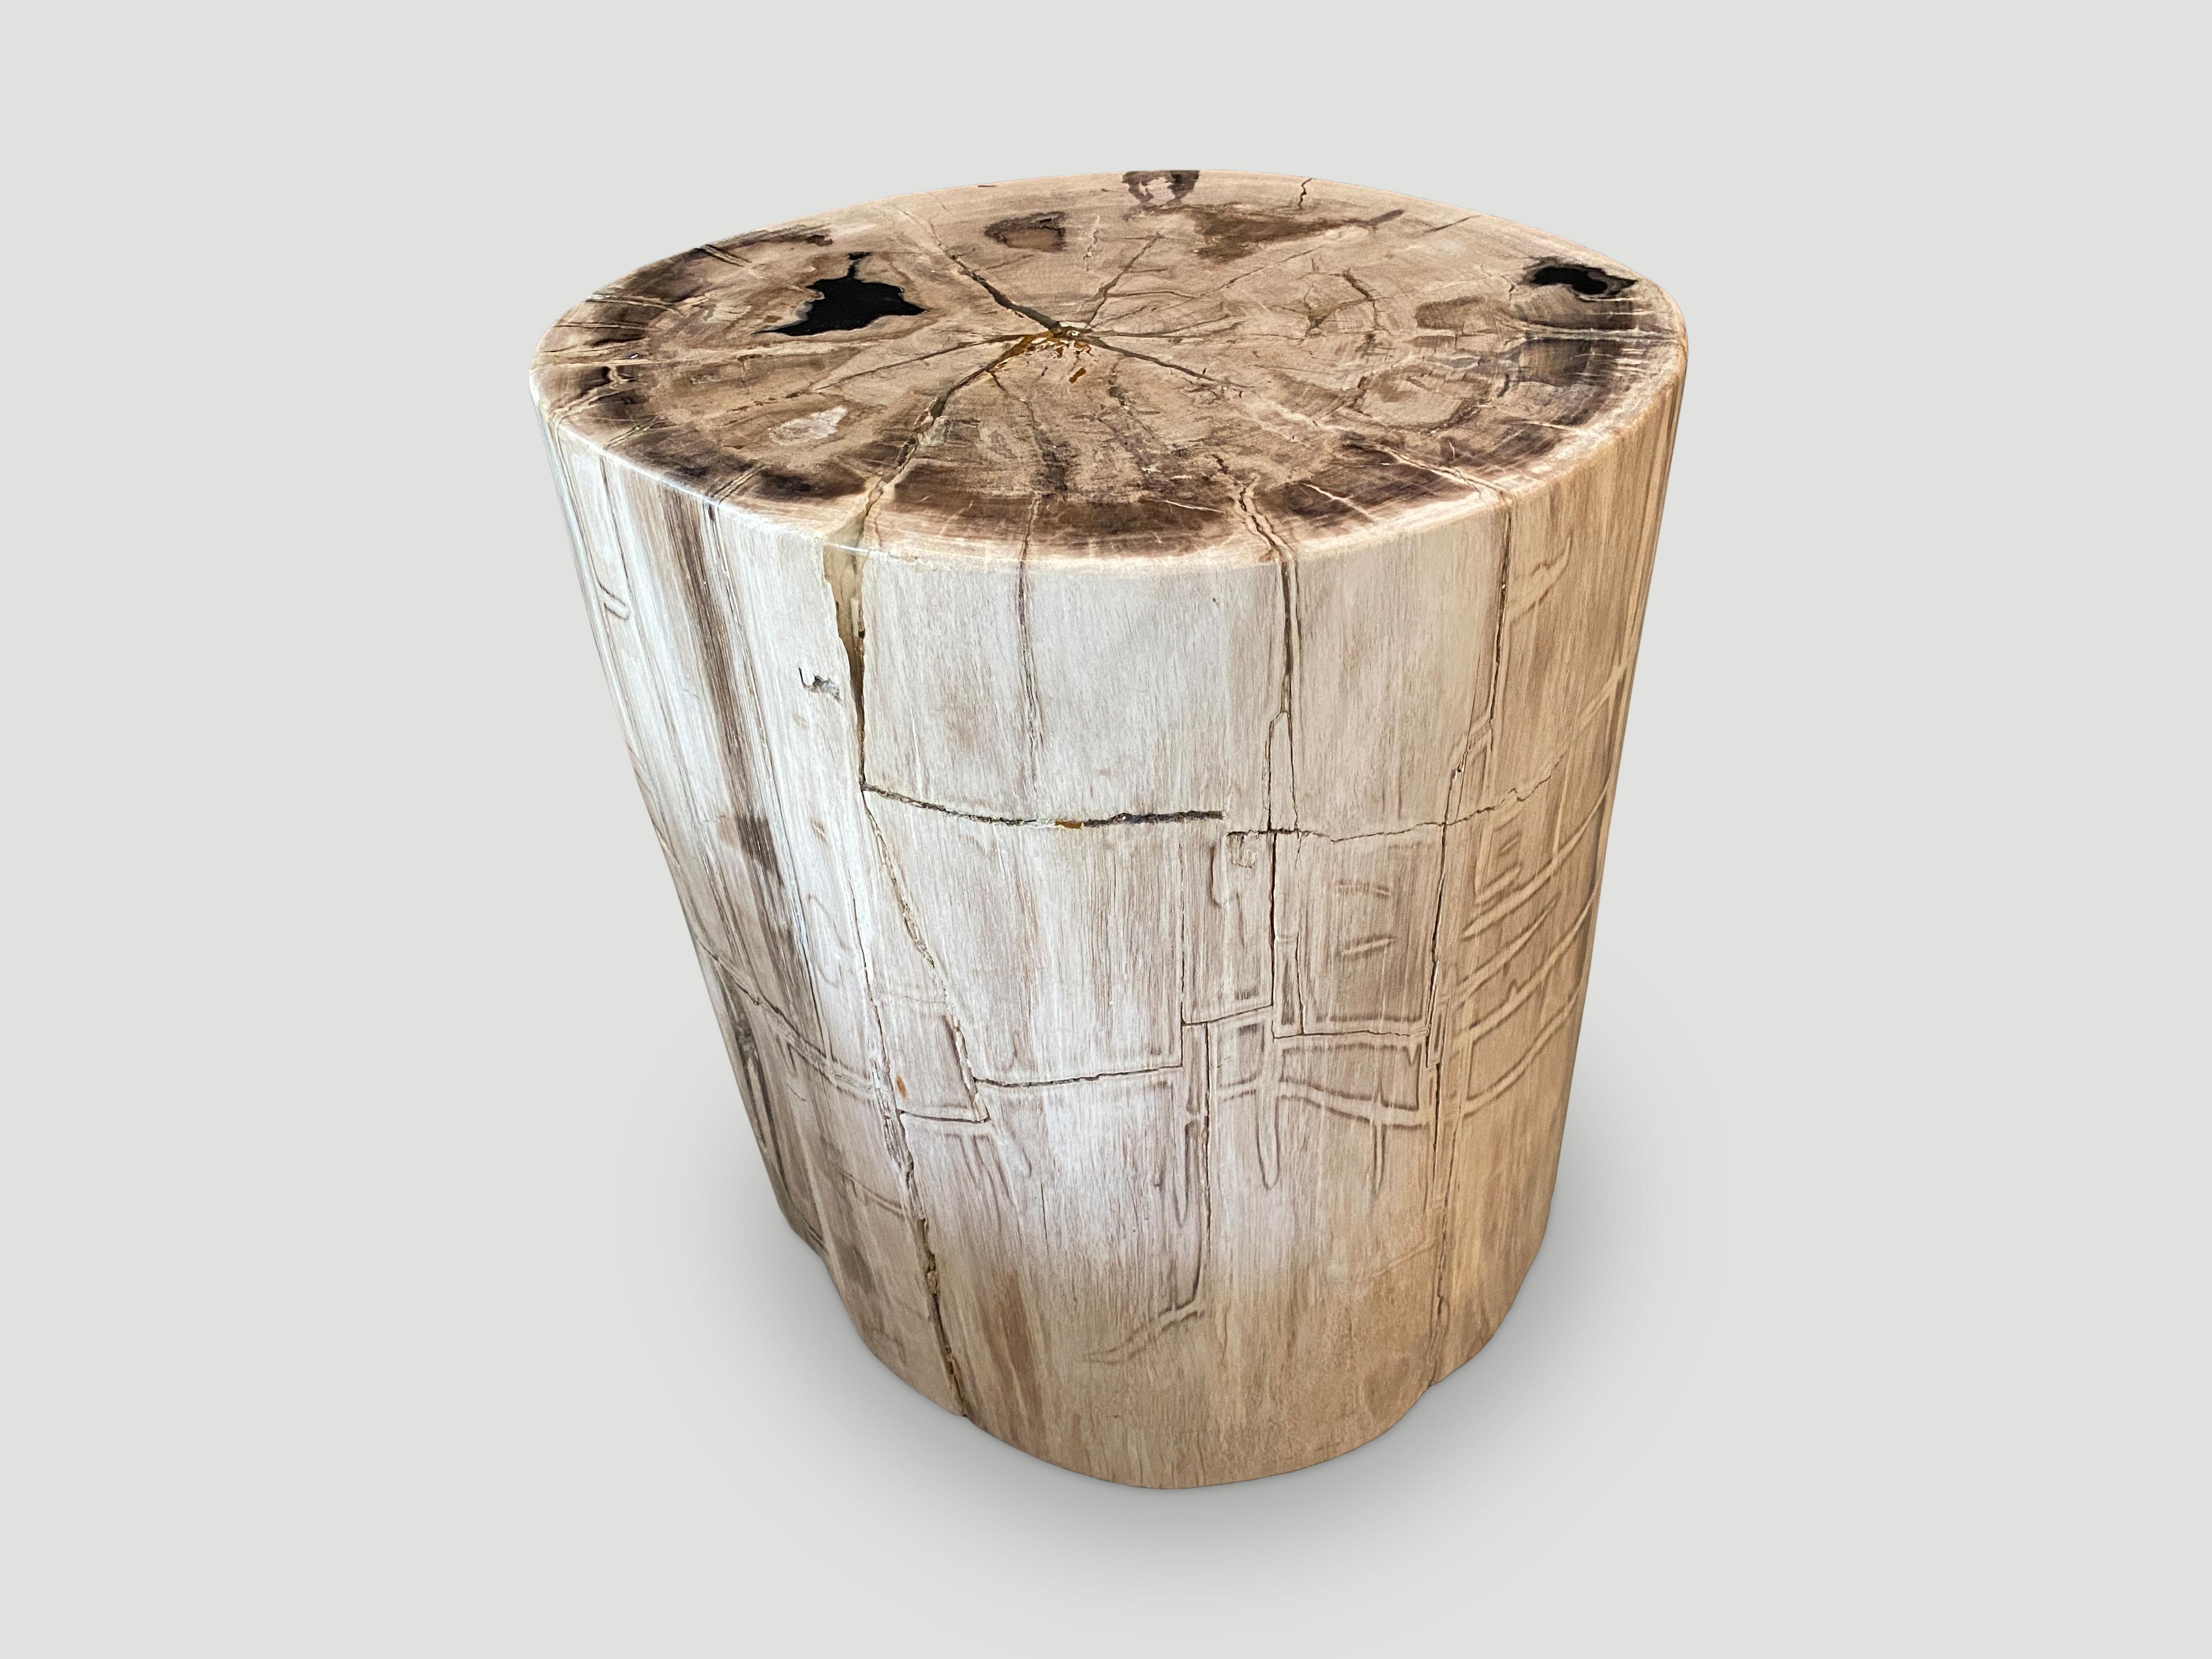 Stunning pale tones with beautiful markings on this petrified wood side table. It’s fascinating how Mother Nature produces these exquisite 40 million year old petrified teak logs with such contrasting colors and natural patterns throughout. Modern